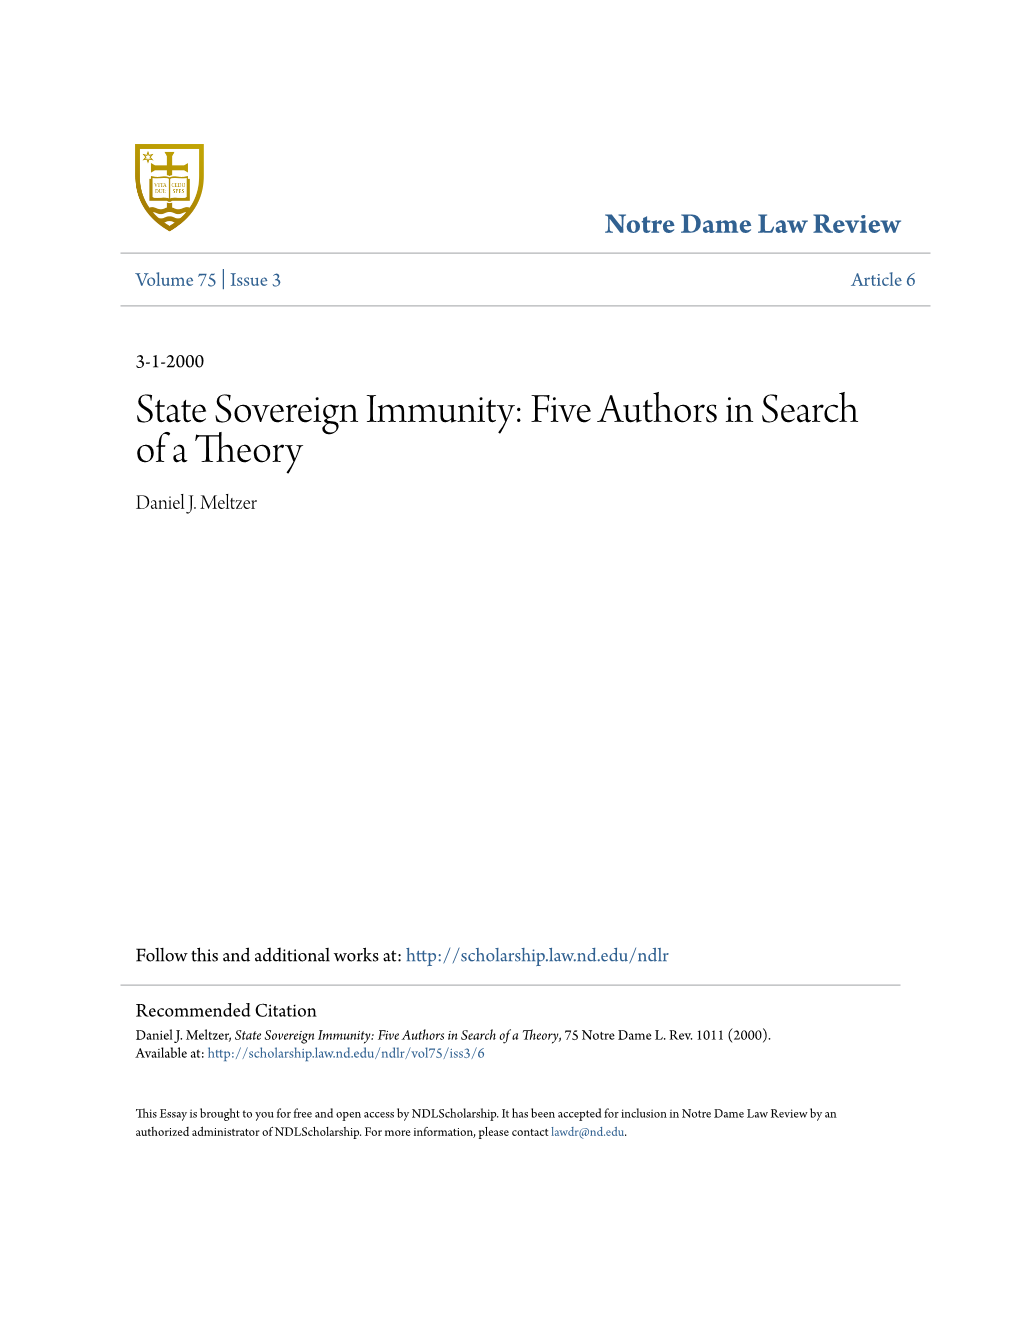 State Sovereign Immunity: Five Authors in Search of a Theory Daniel J